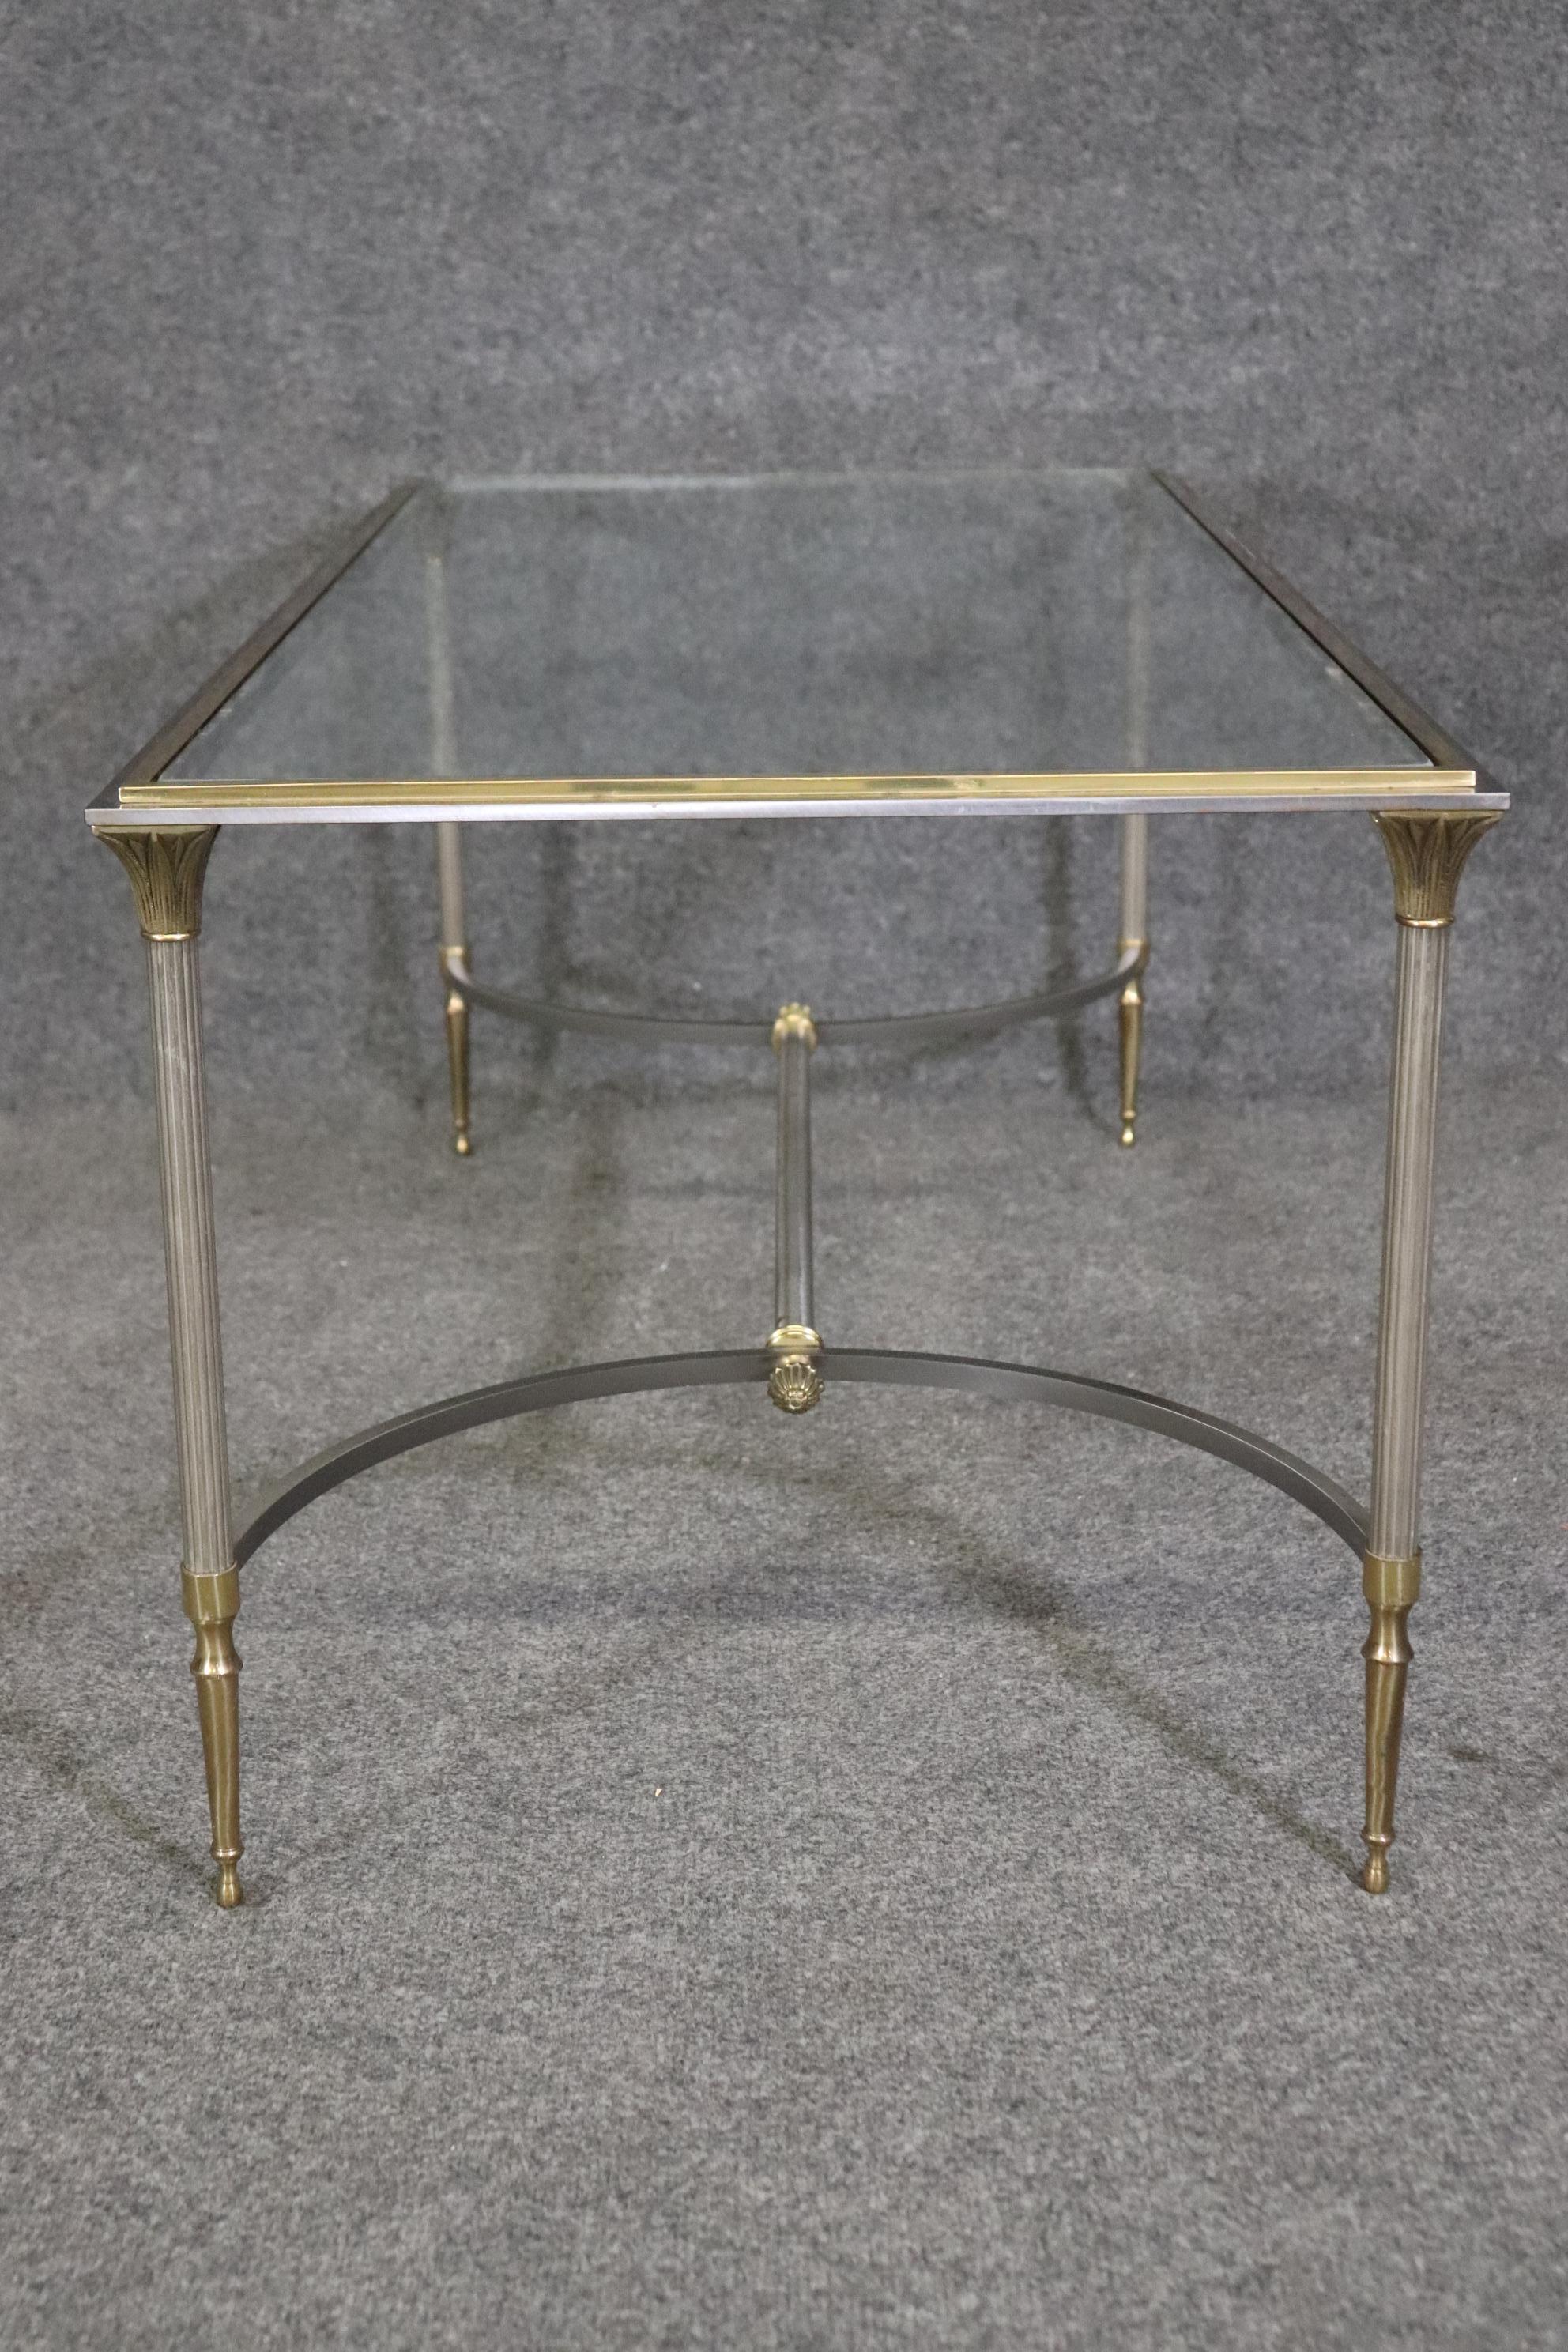 Hollywood Regency Maison Jansen Attributed Directoire Style Glass Top Coffee Table